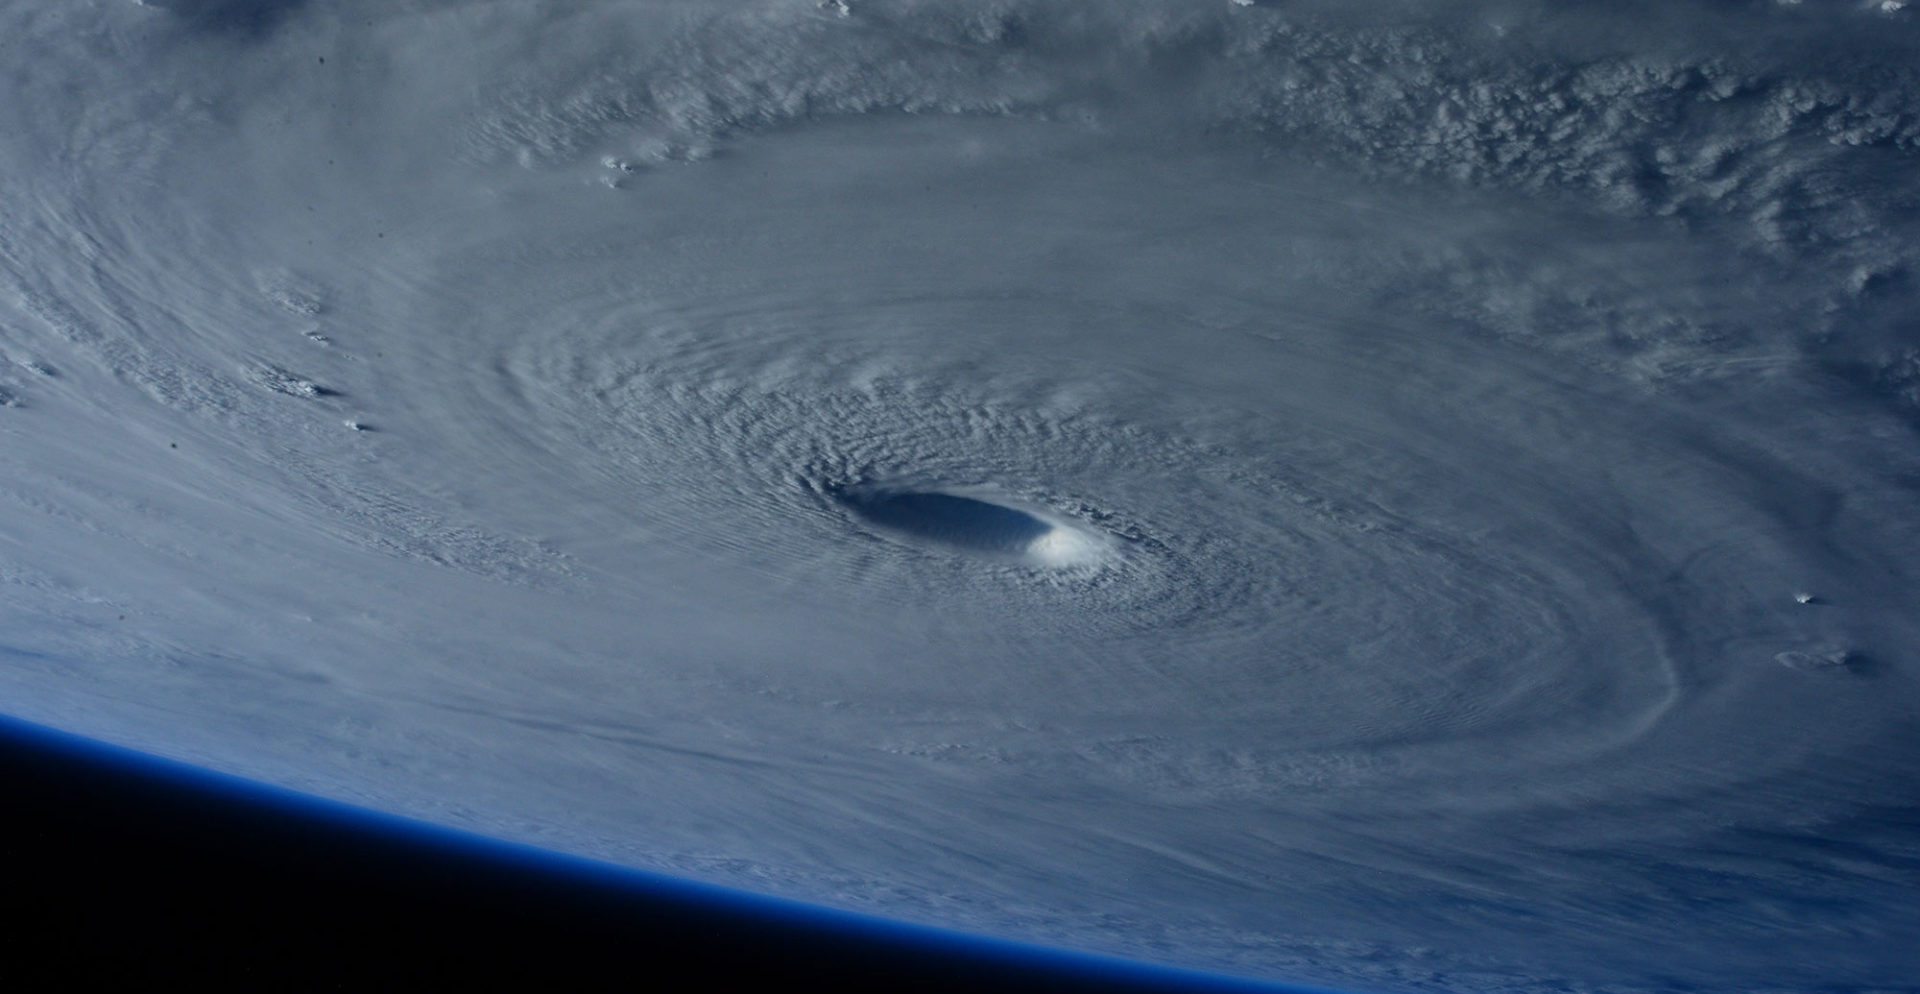 Photograph of a hurricane from space